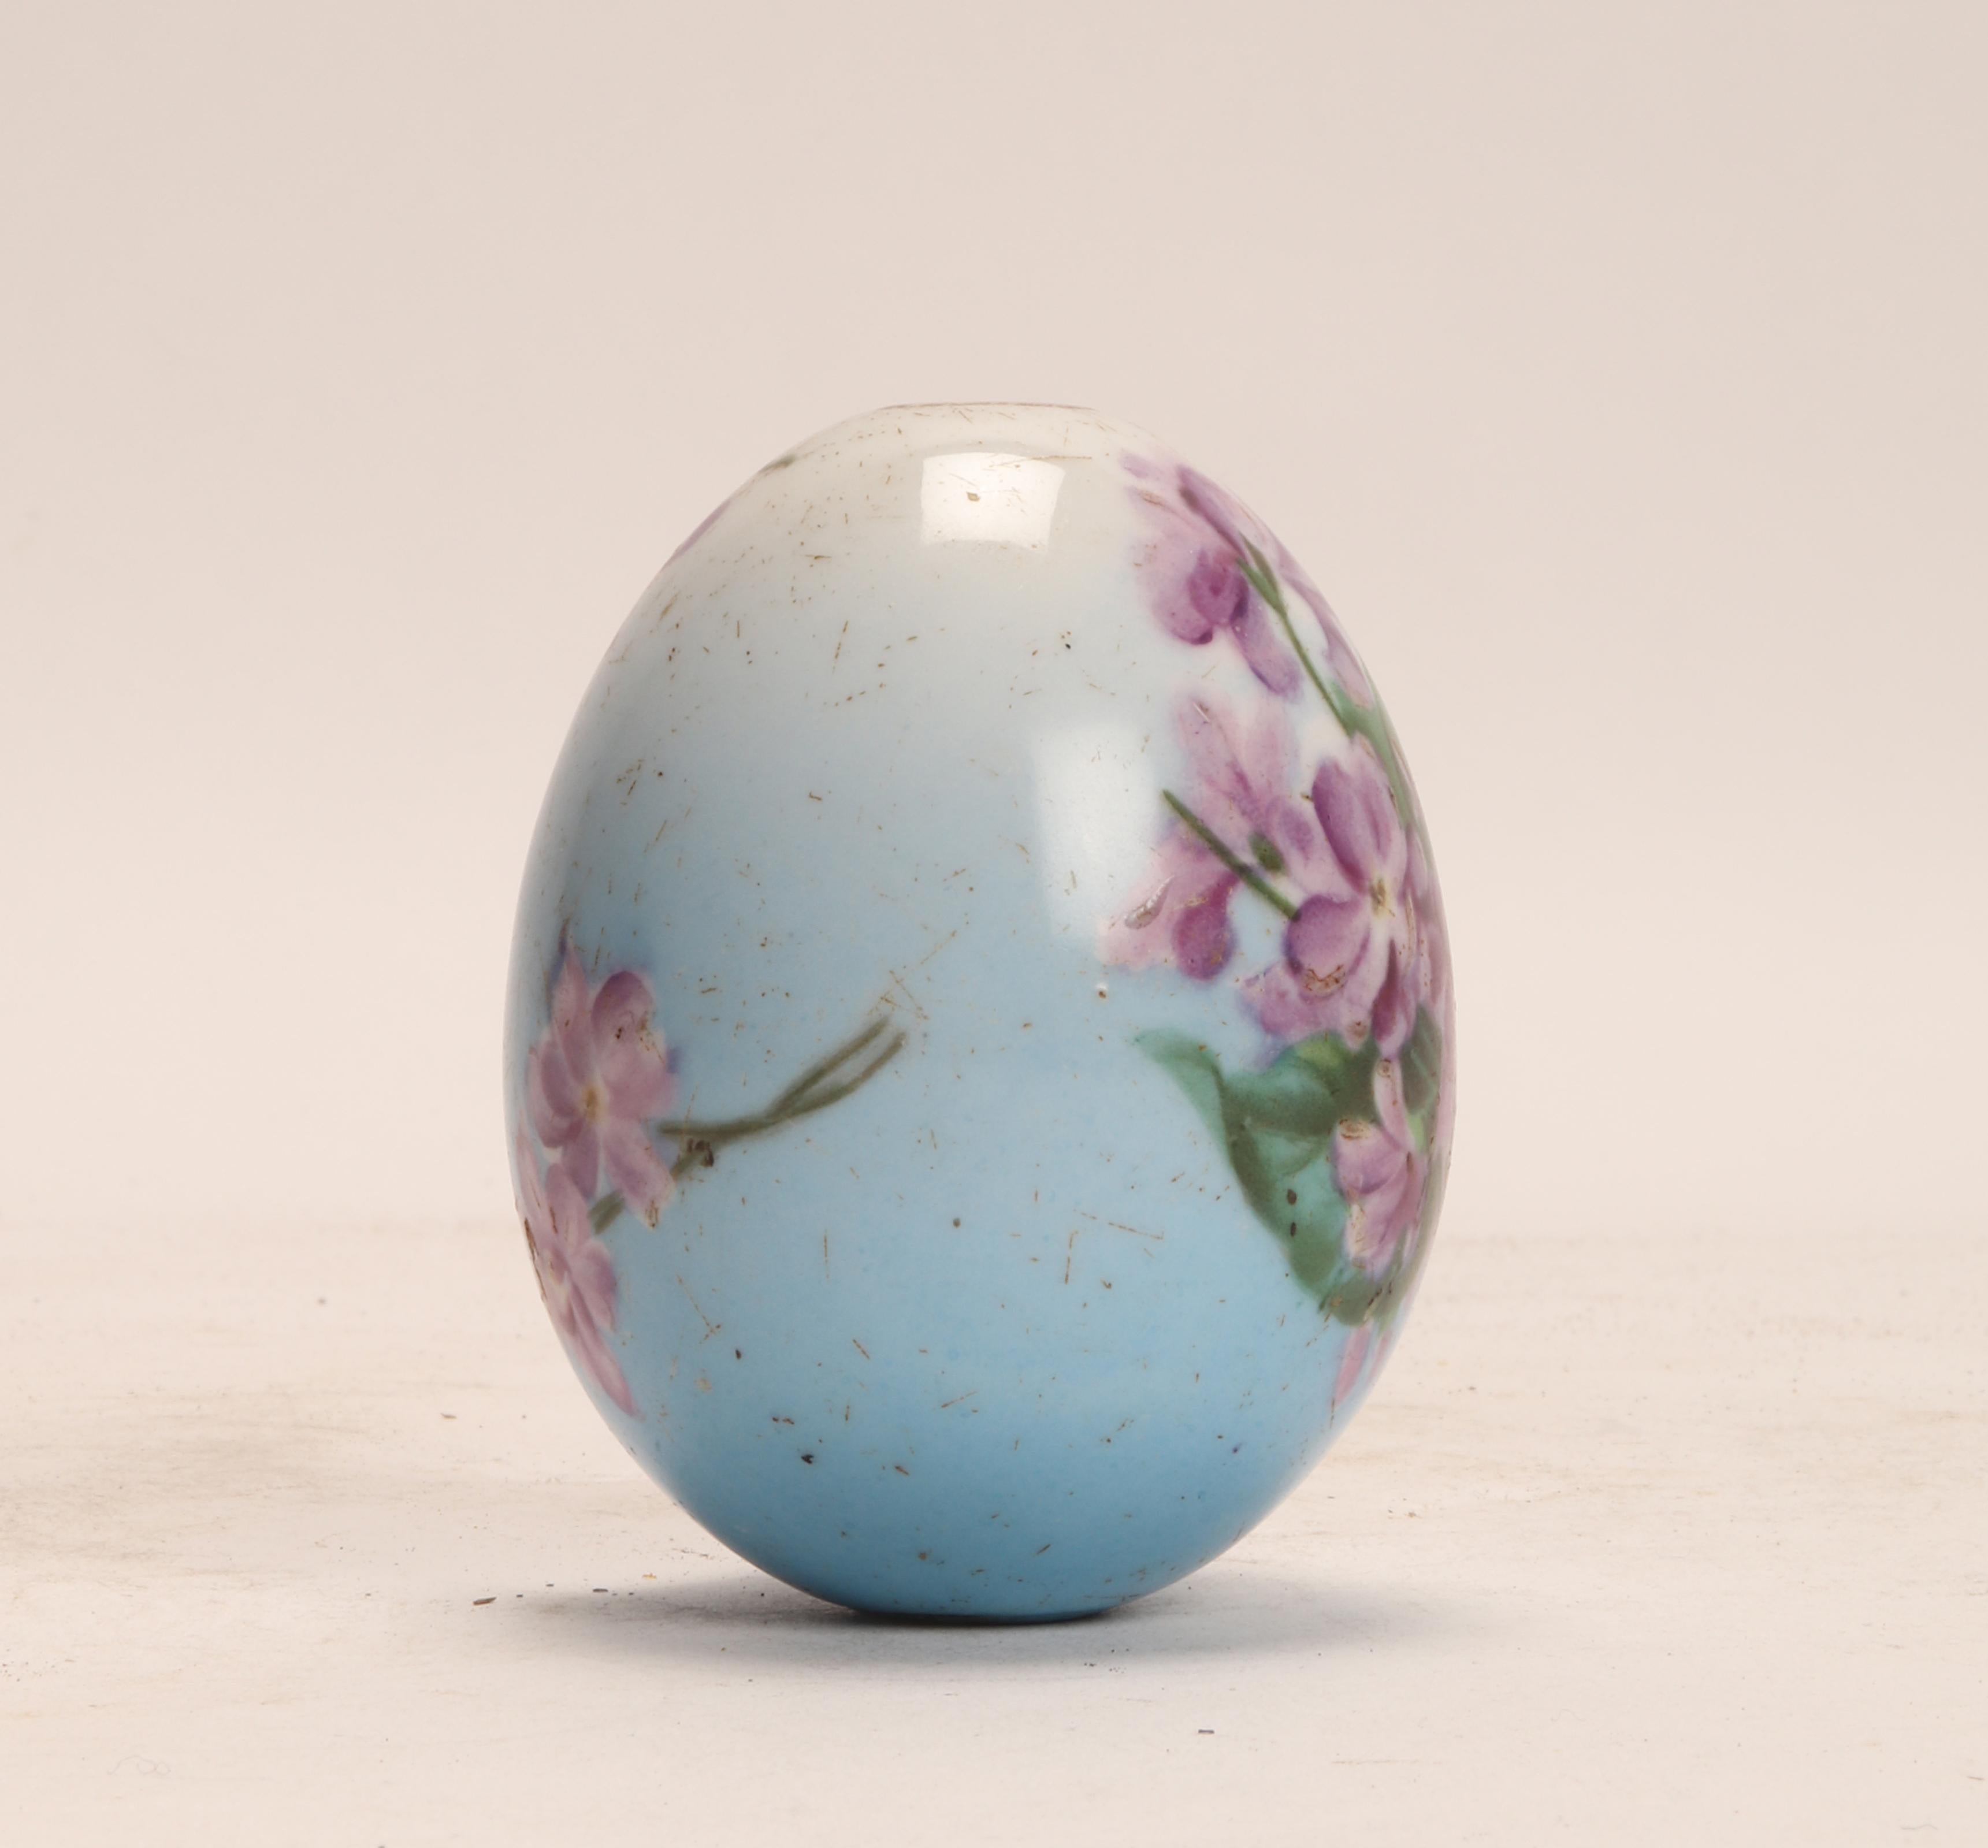 Russian Porcelain Easter Egg, Russia End of 19th Century